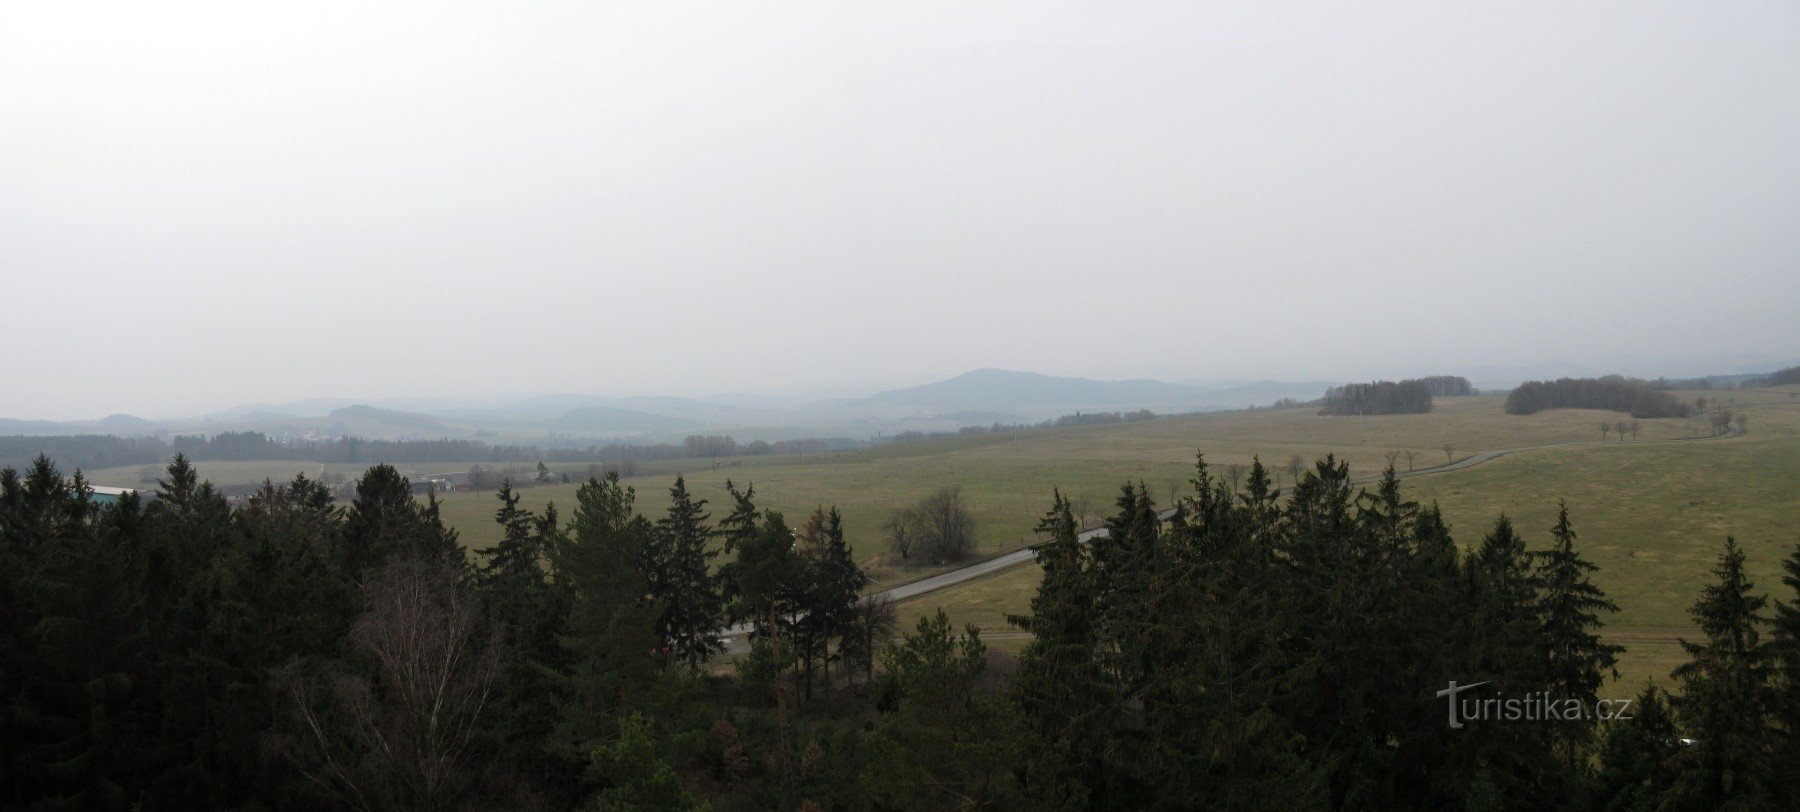 Lookout tower Na Skále - hazy view